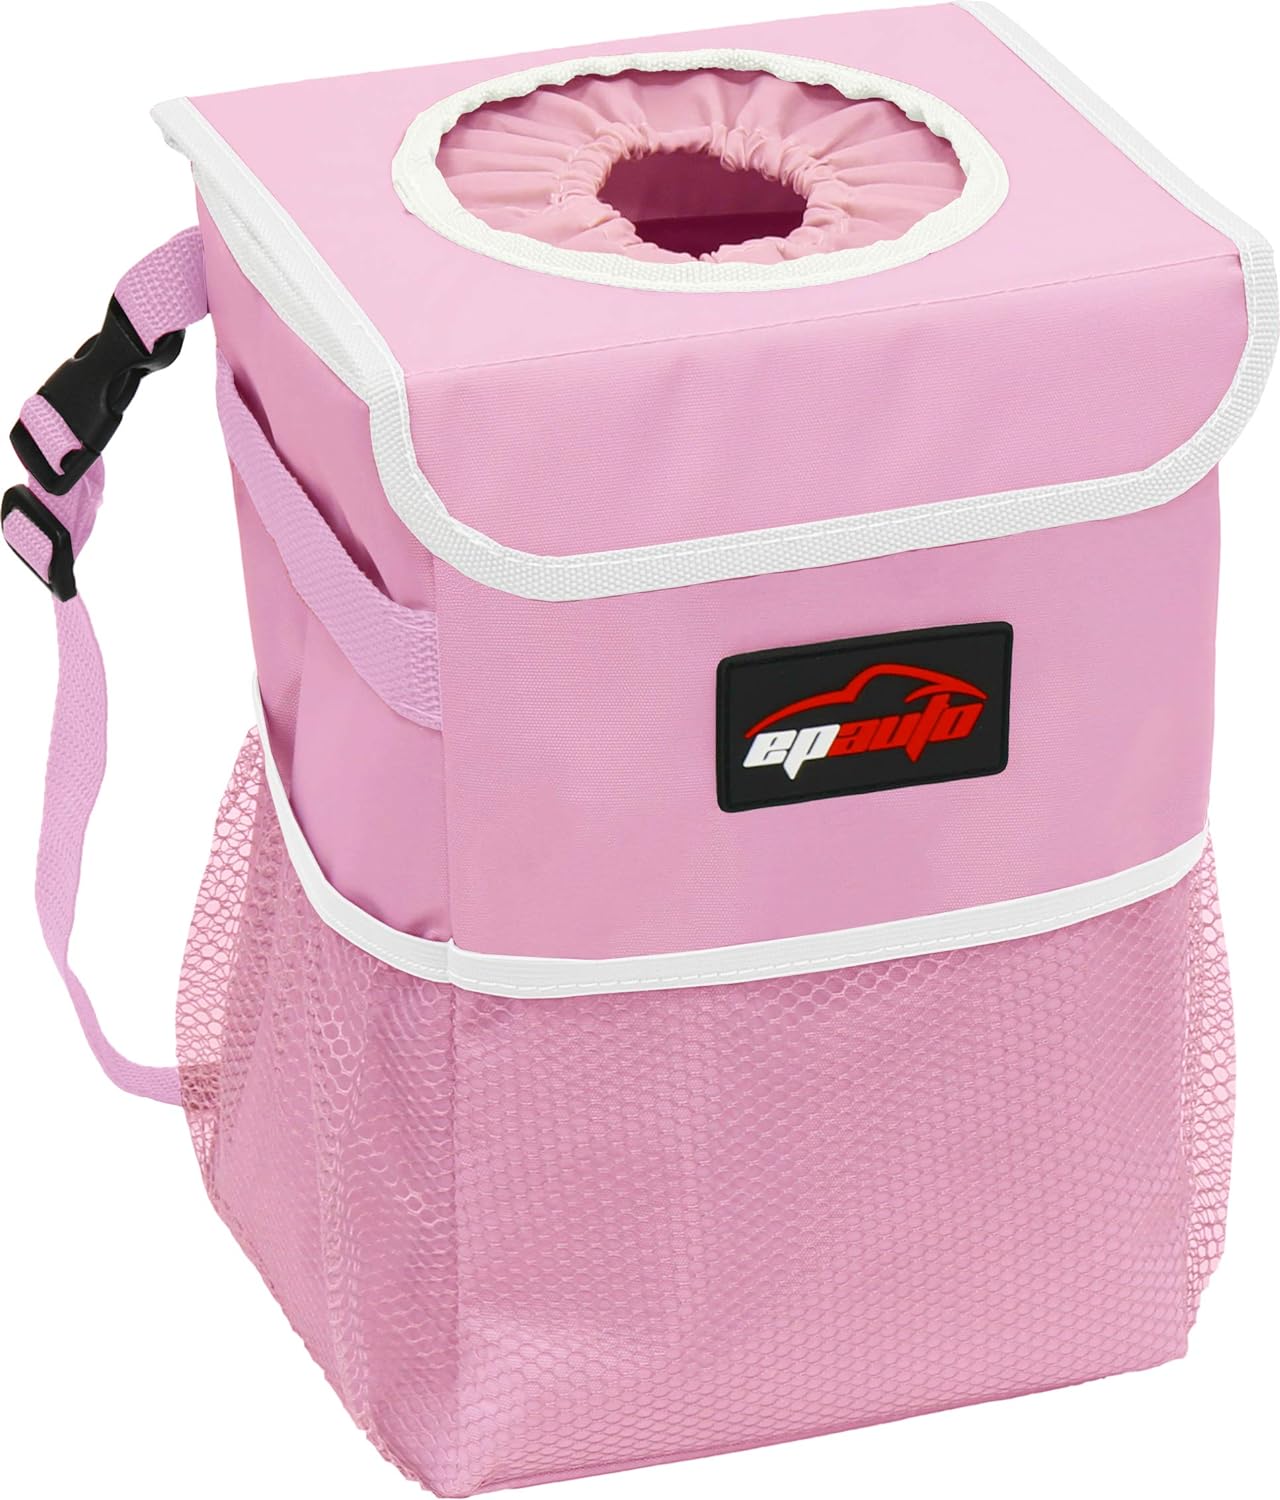 Waterproof Car Trash Can with Lid and Storage Pockets, Pink